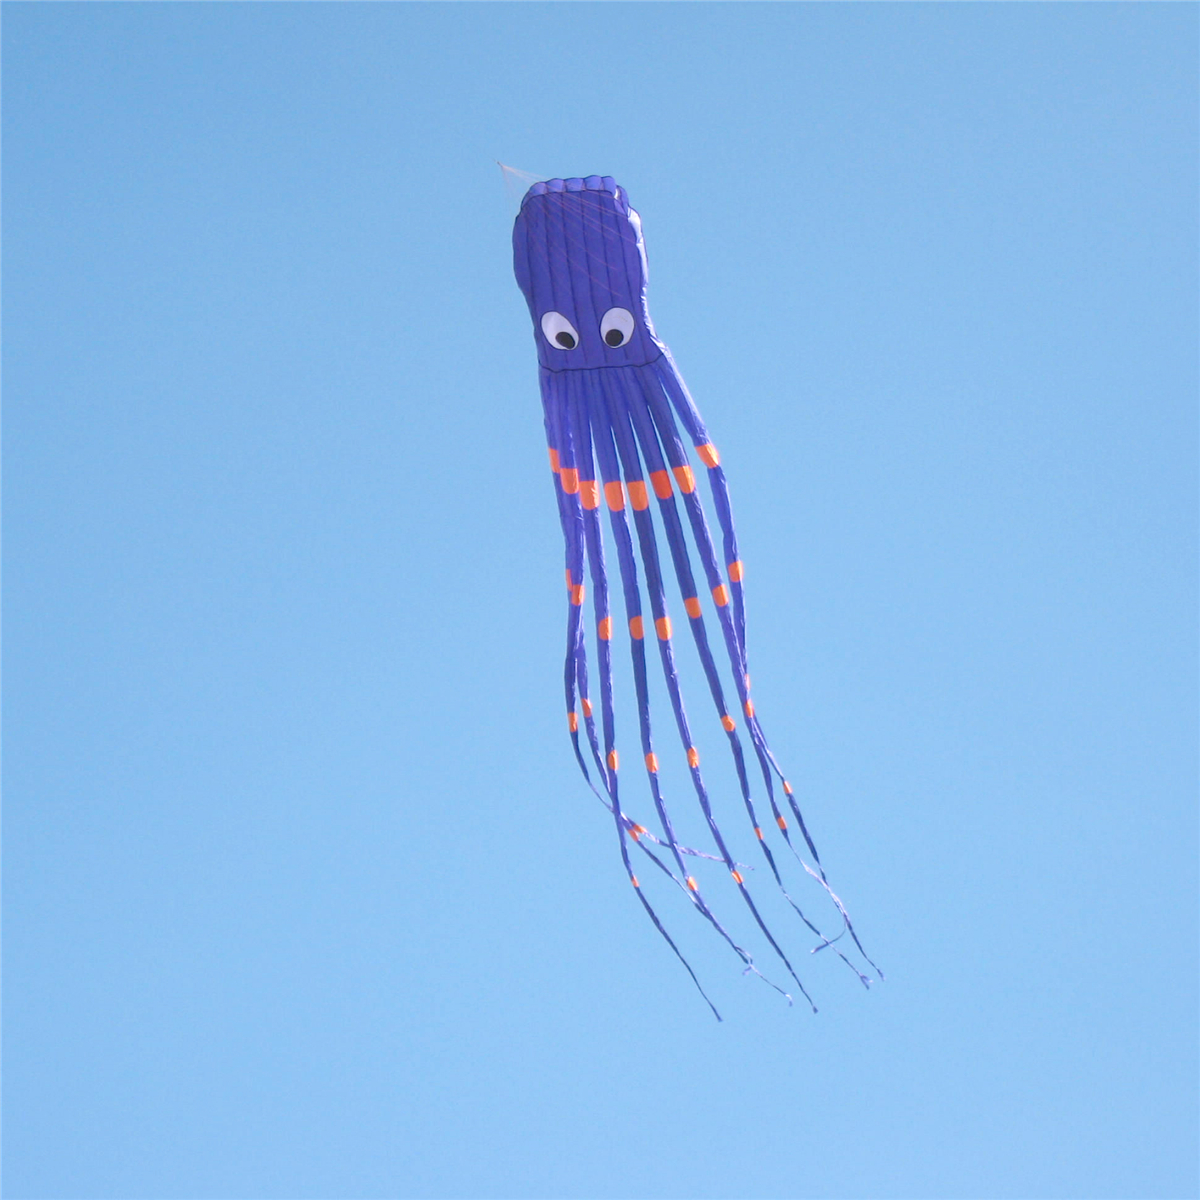 35Inches-Octopus-Kite-Outdoor-Sports-Toys-For-Kids-Single-Line-Parachute-Toys-1378526